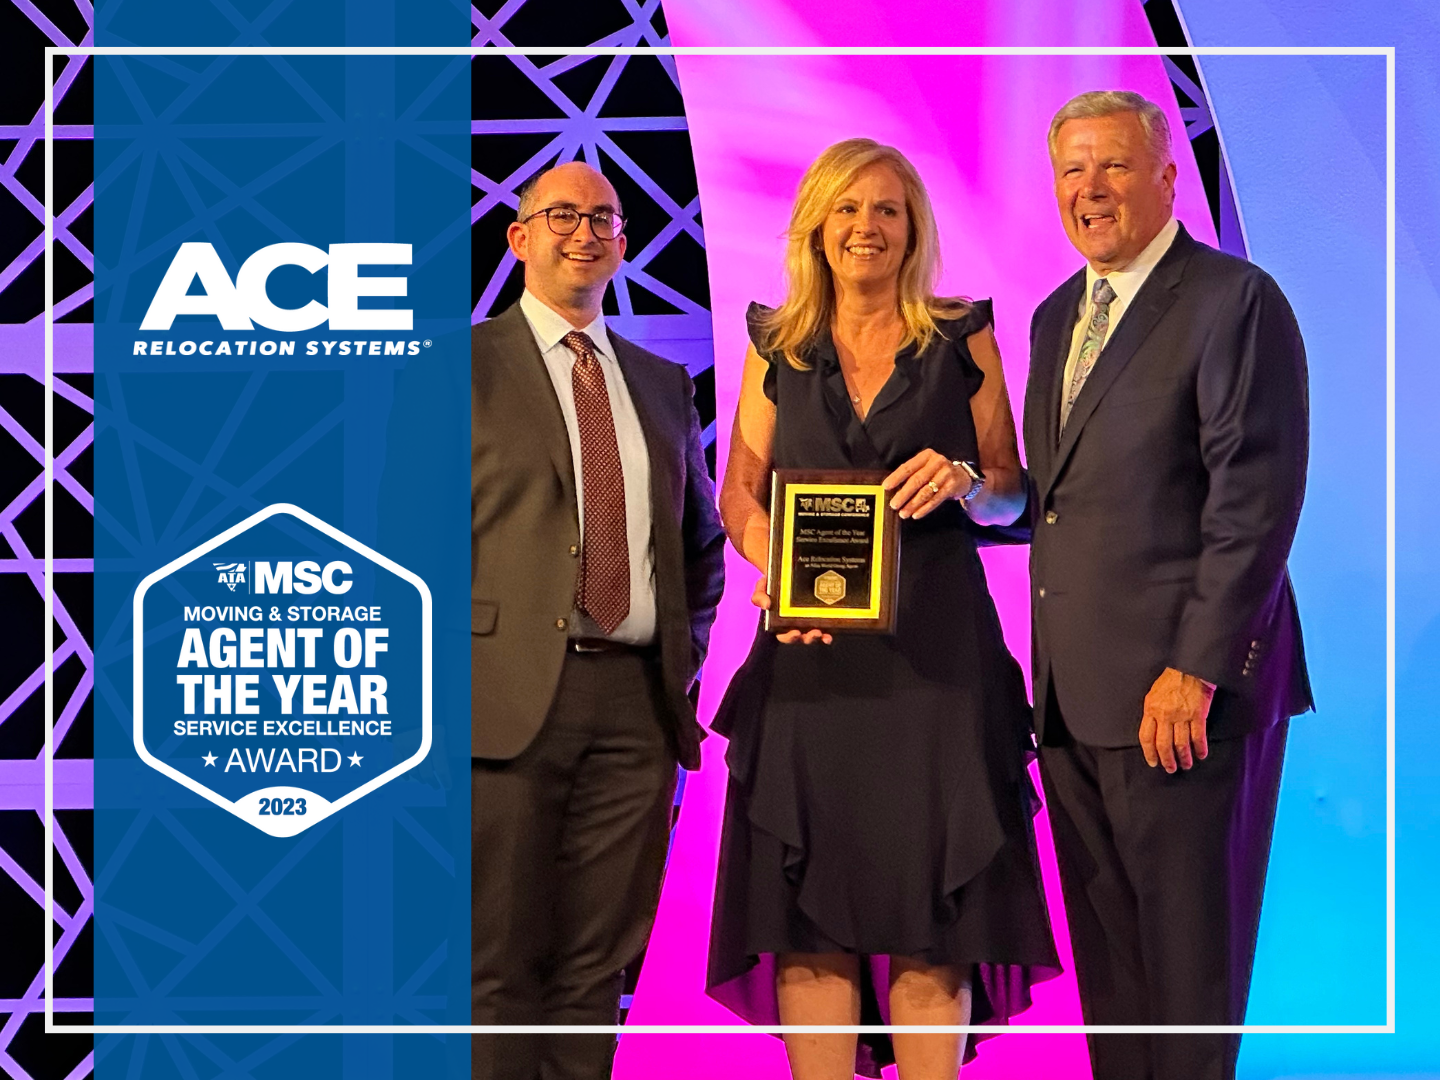 Ace Relocation Wins 2023 MSC Agent of The Year Award